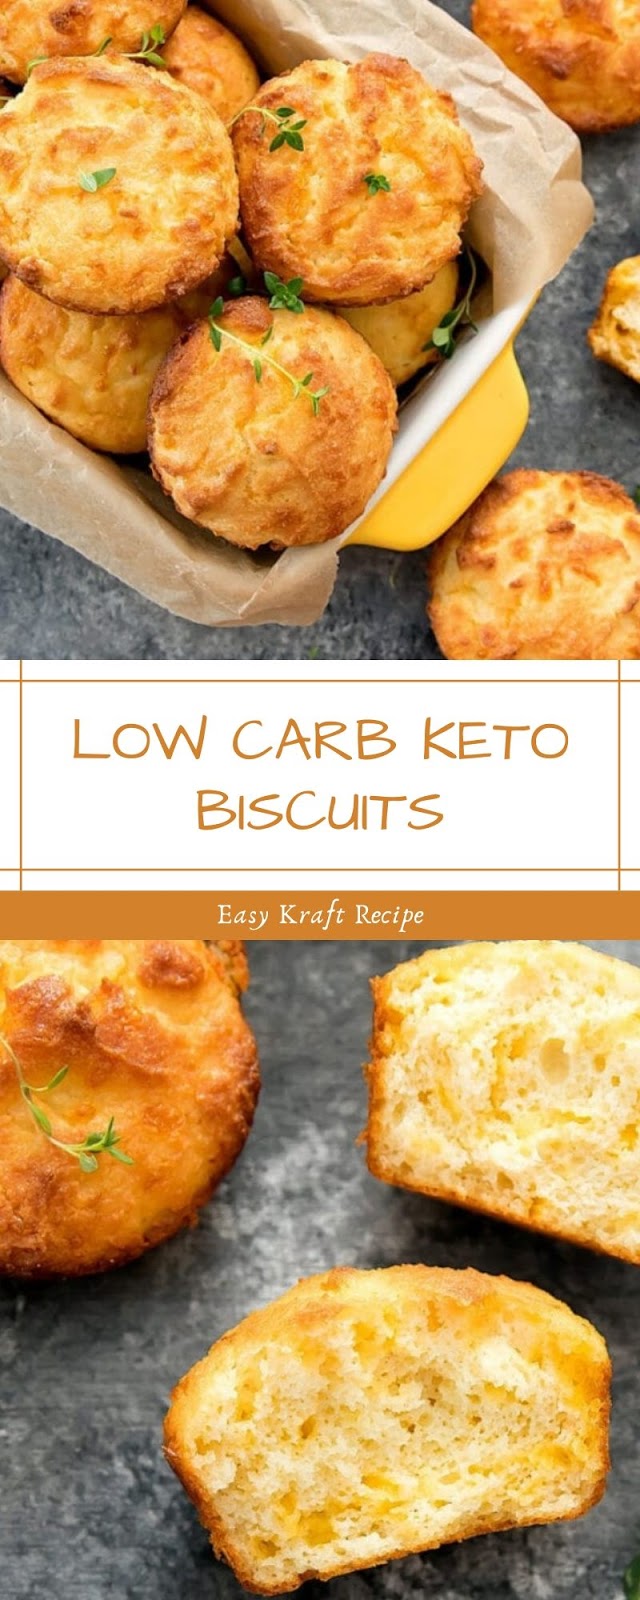 LOW CARB KETO BISCUITS - Easy Kraft Recipes